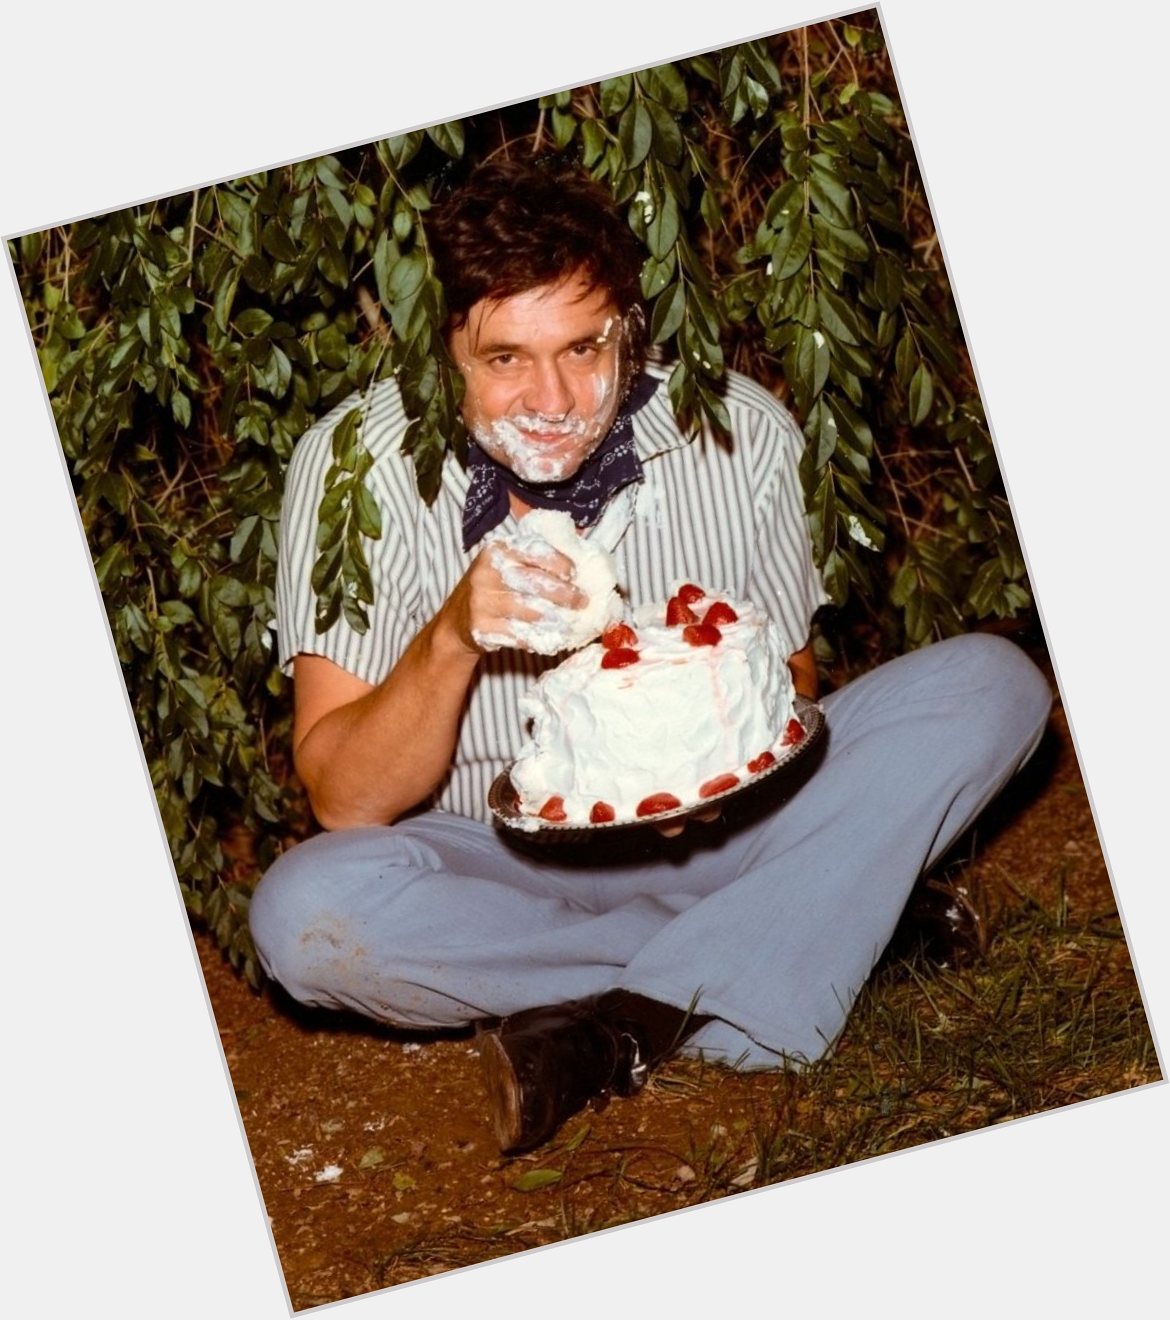 Happy 87th birthday to Johnny Cash. I hope they\ve got good cake up there! 